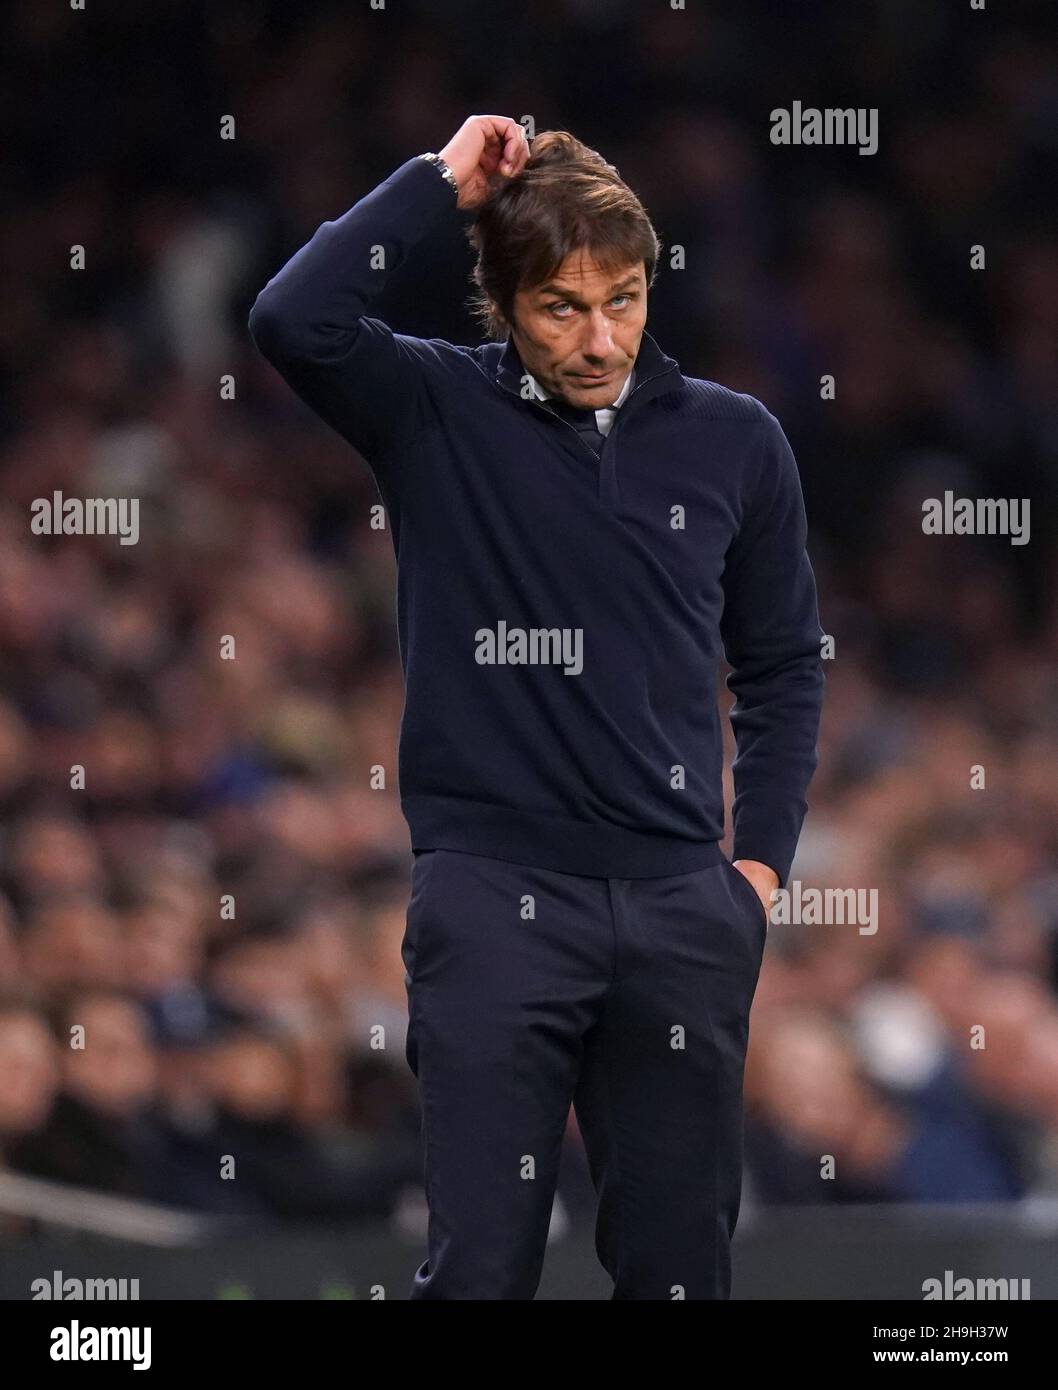 File photo dated 21-11-2021 of Tottenham Hotspur manager Antonio Conte. Tottenham’s plans to manage a busy period of games have been hindered by a coronavirus outbreak at the club. A number of first-team players and two members of the coaching staff have tested positive ahead of further PCR tests on Tuesday, the PA news agency understands. Issue date: Tuesday December 7, 2021. Stock Photo